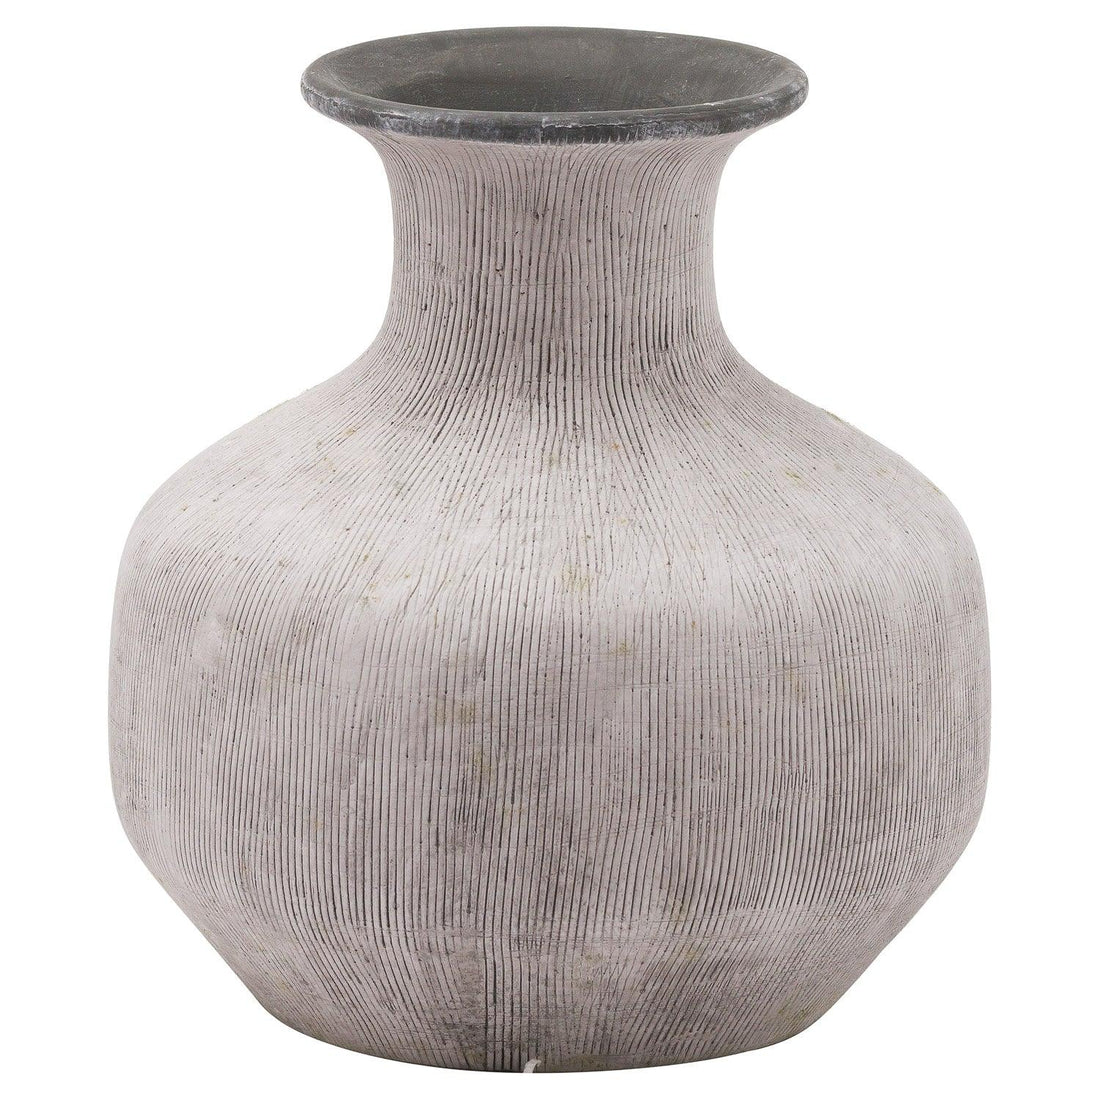 Bloomville Squat Stone Vase - £69.95 - Gifts & Accessories > Vases > Black Friday Vases and Planters 